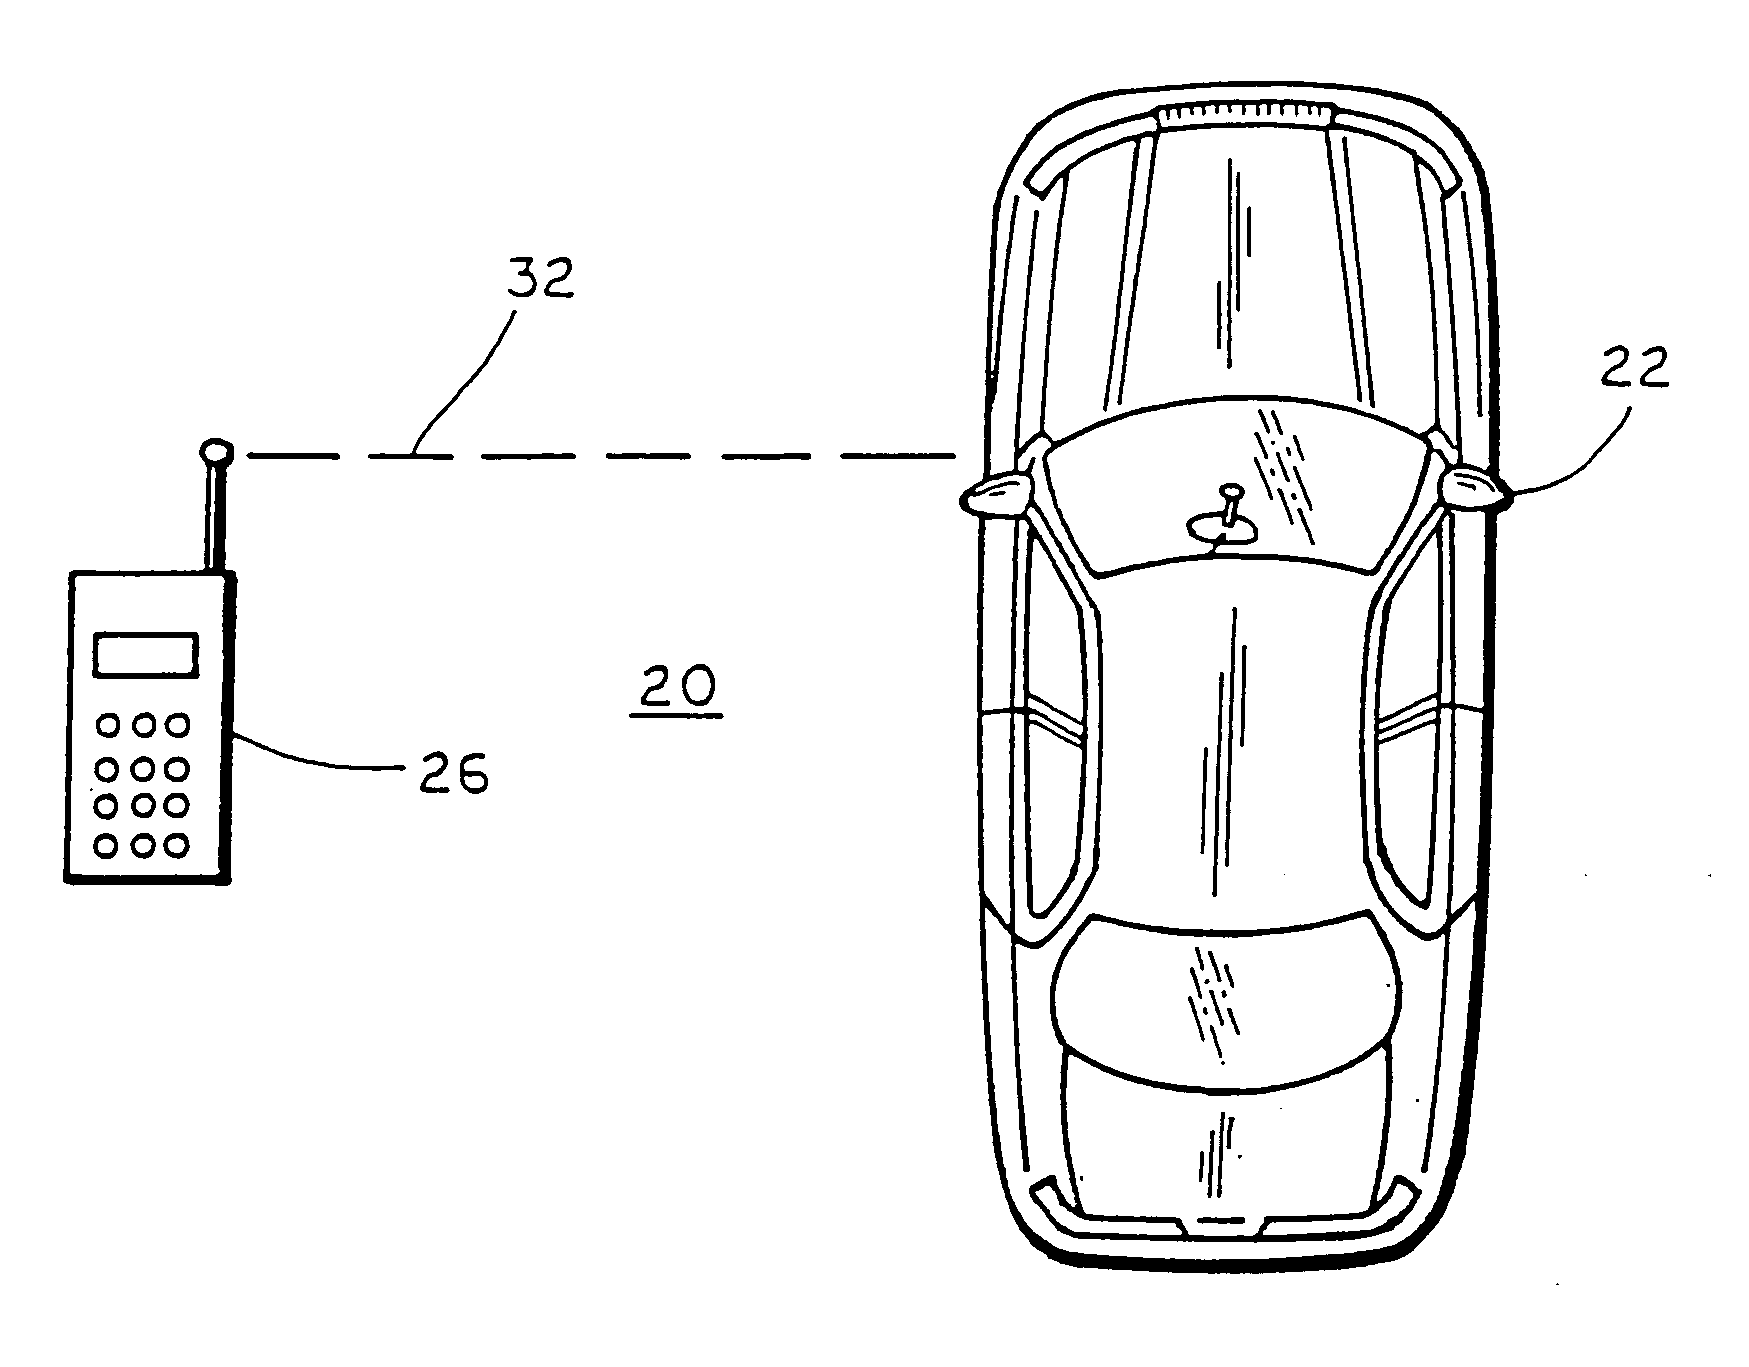 Navigation system for a vehicle